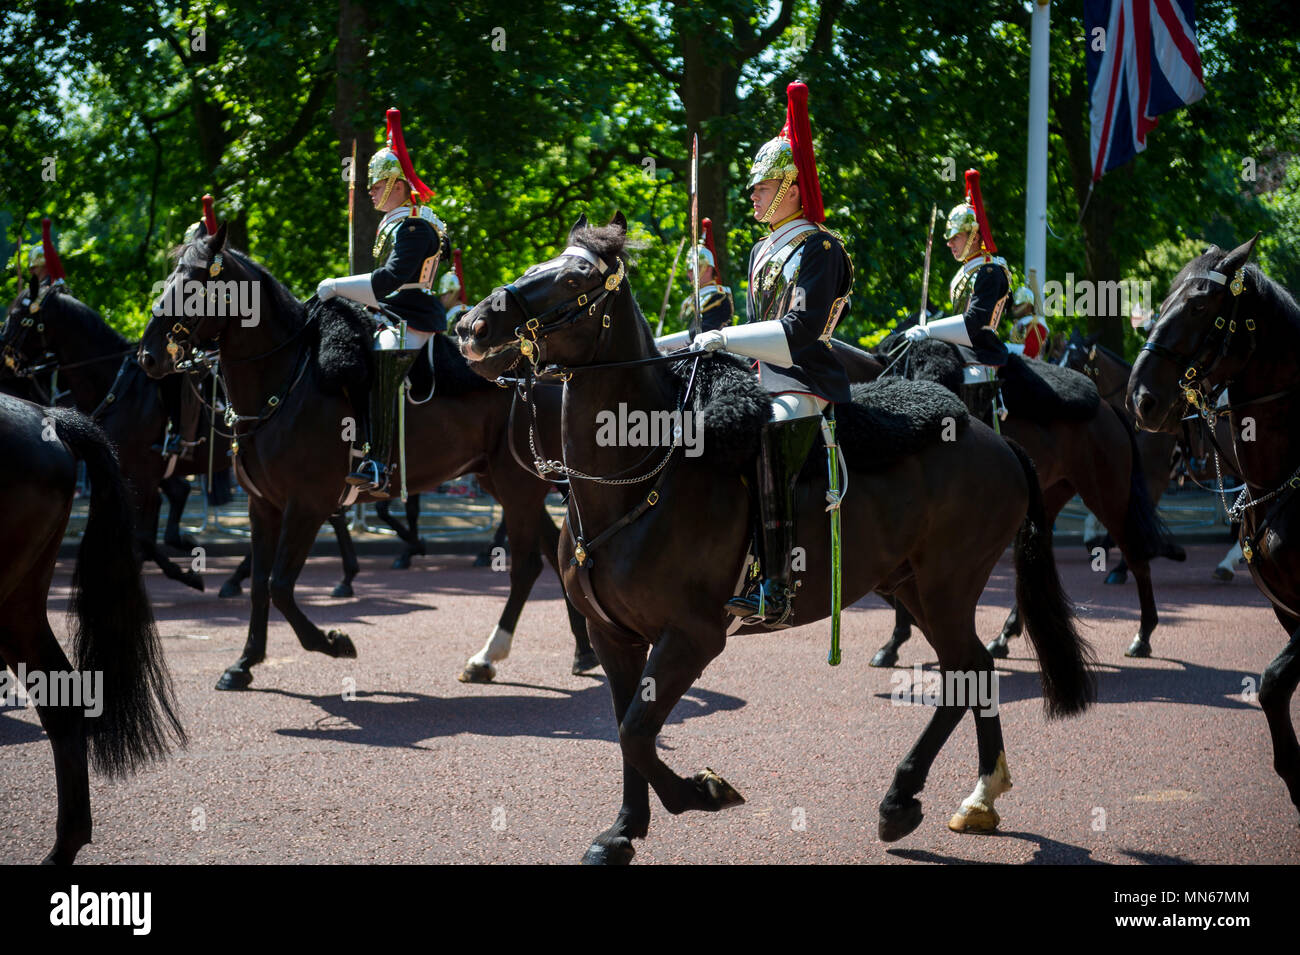 LONDON - JUNE 17, 2017: Royal guards of the Household Calvary on horseback dressed in ceremonial uniform pass down the Mall. Stock Photo